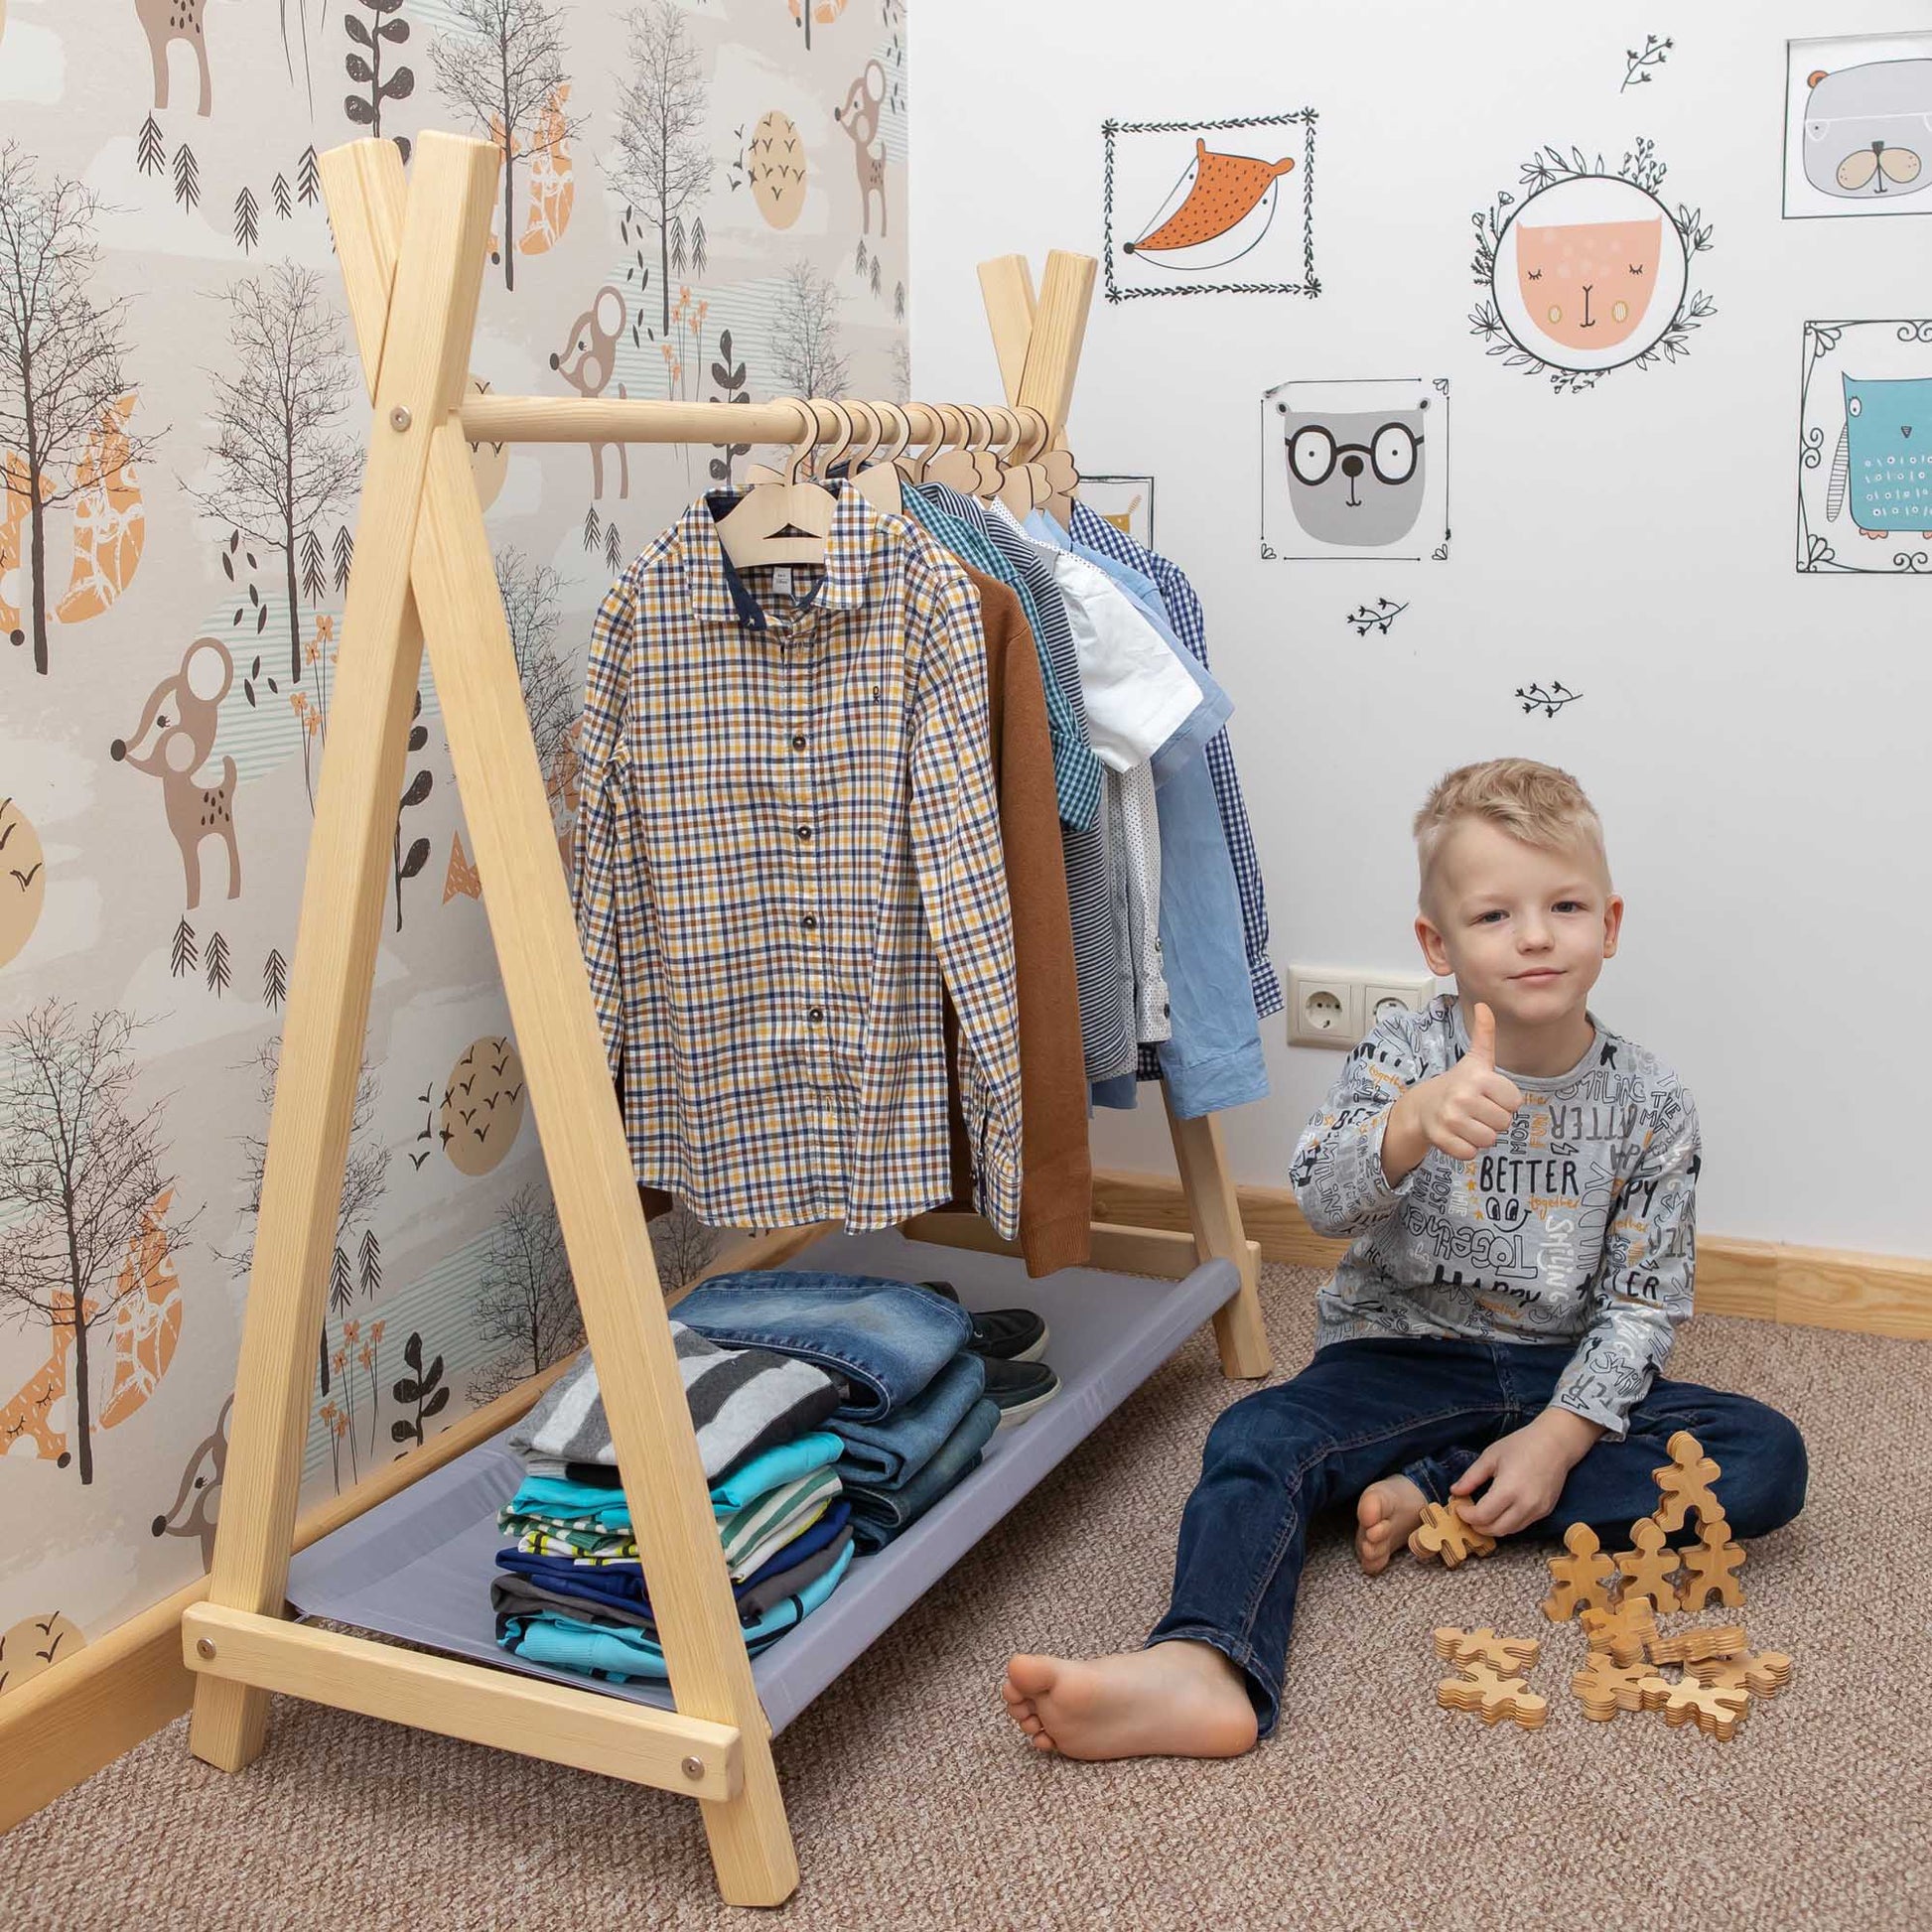 A young boy sitting in front of a "Kids' clothing rack with storage" from Sweet Home From Wood.